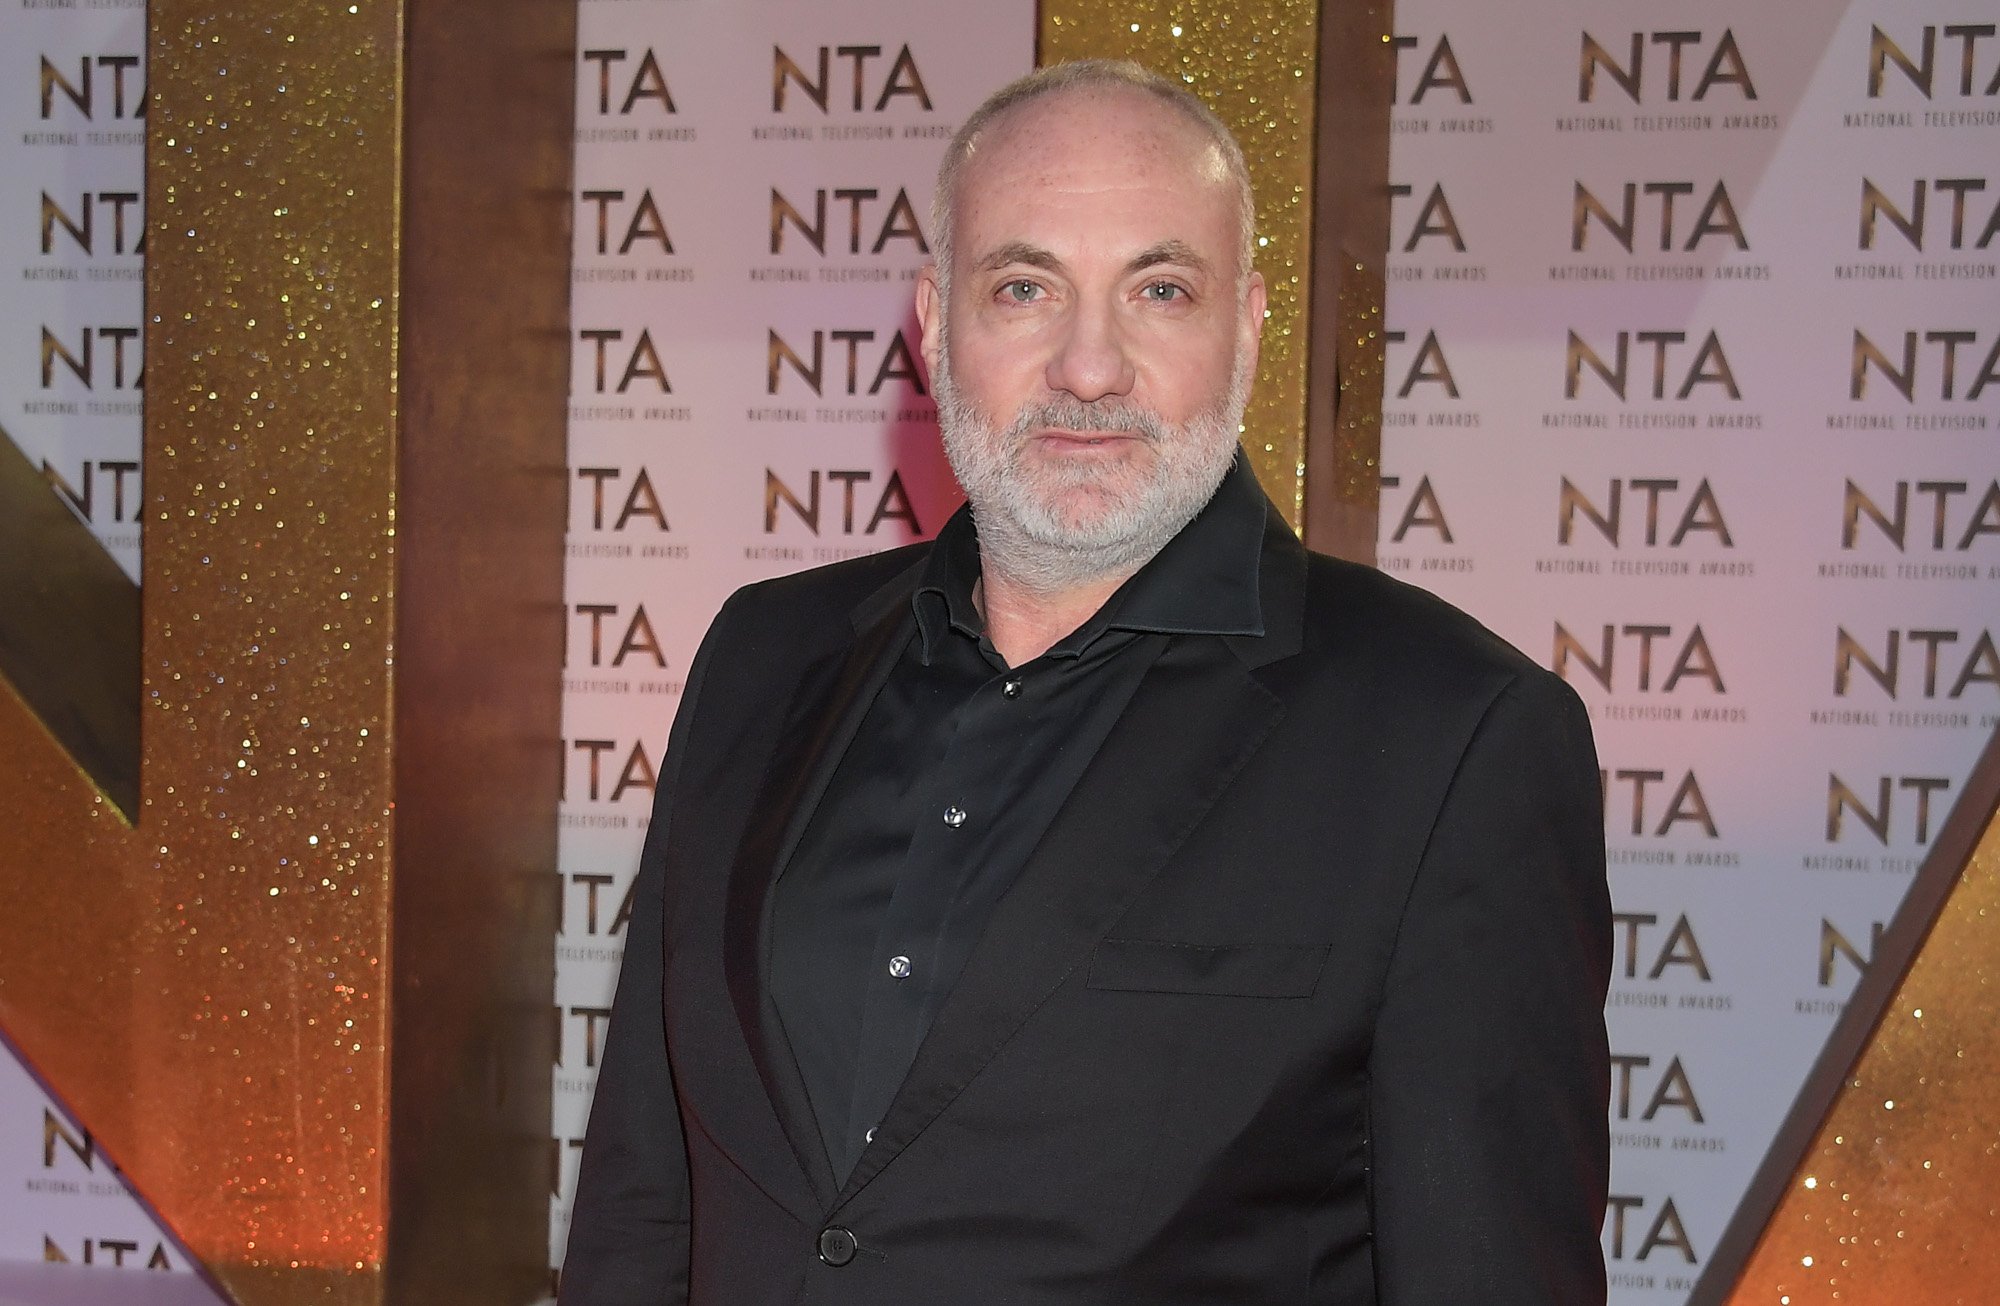 Kim Bodnia wearing a black suit and standing in front of a National Television Awards wall